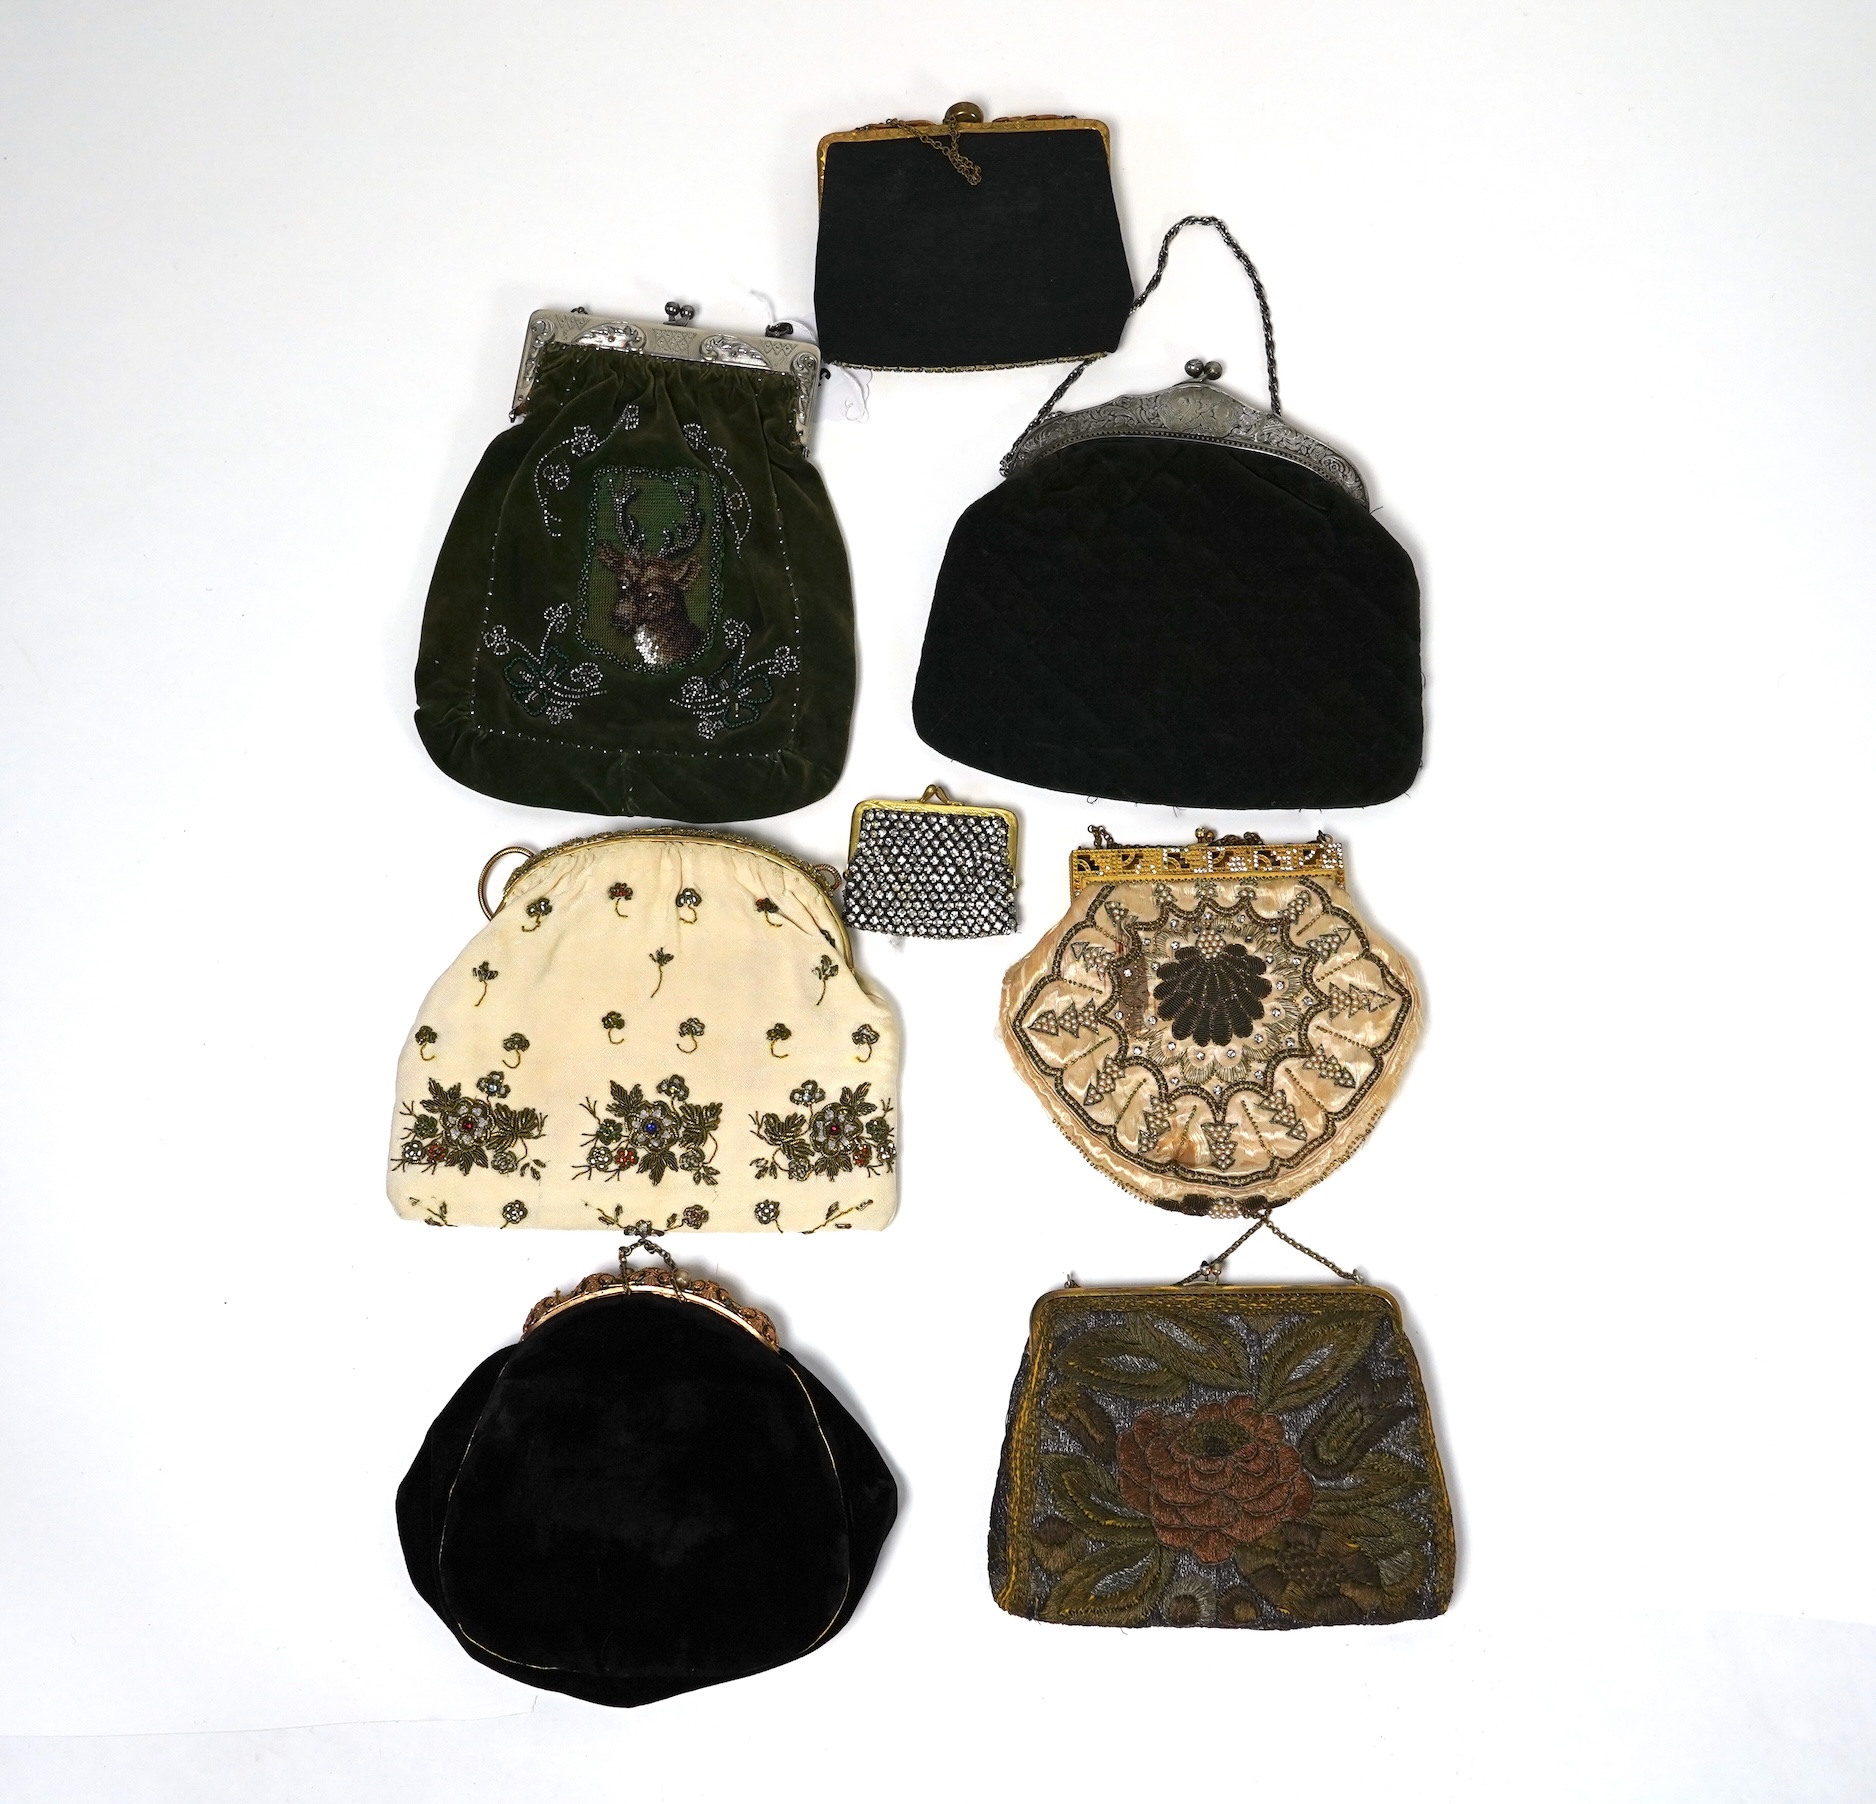 Mixed evening bags; including a 19th century velvet and cut steel handbag, a similar bag, three later gold metallic embroidered evening bags, a mixed metalic evening bag and a diamonte bag and purse (8)